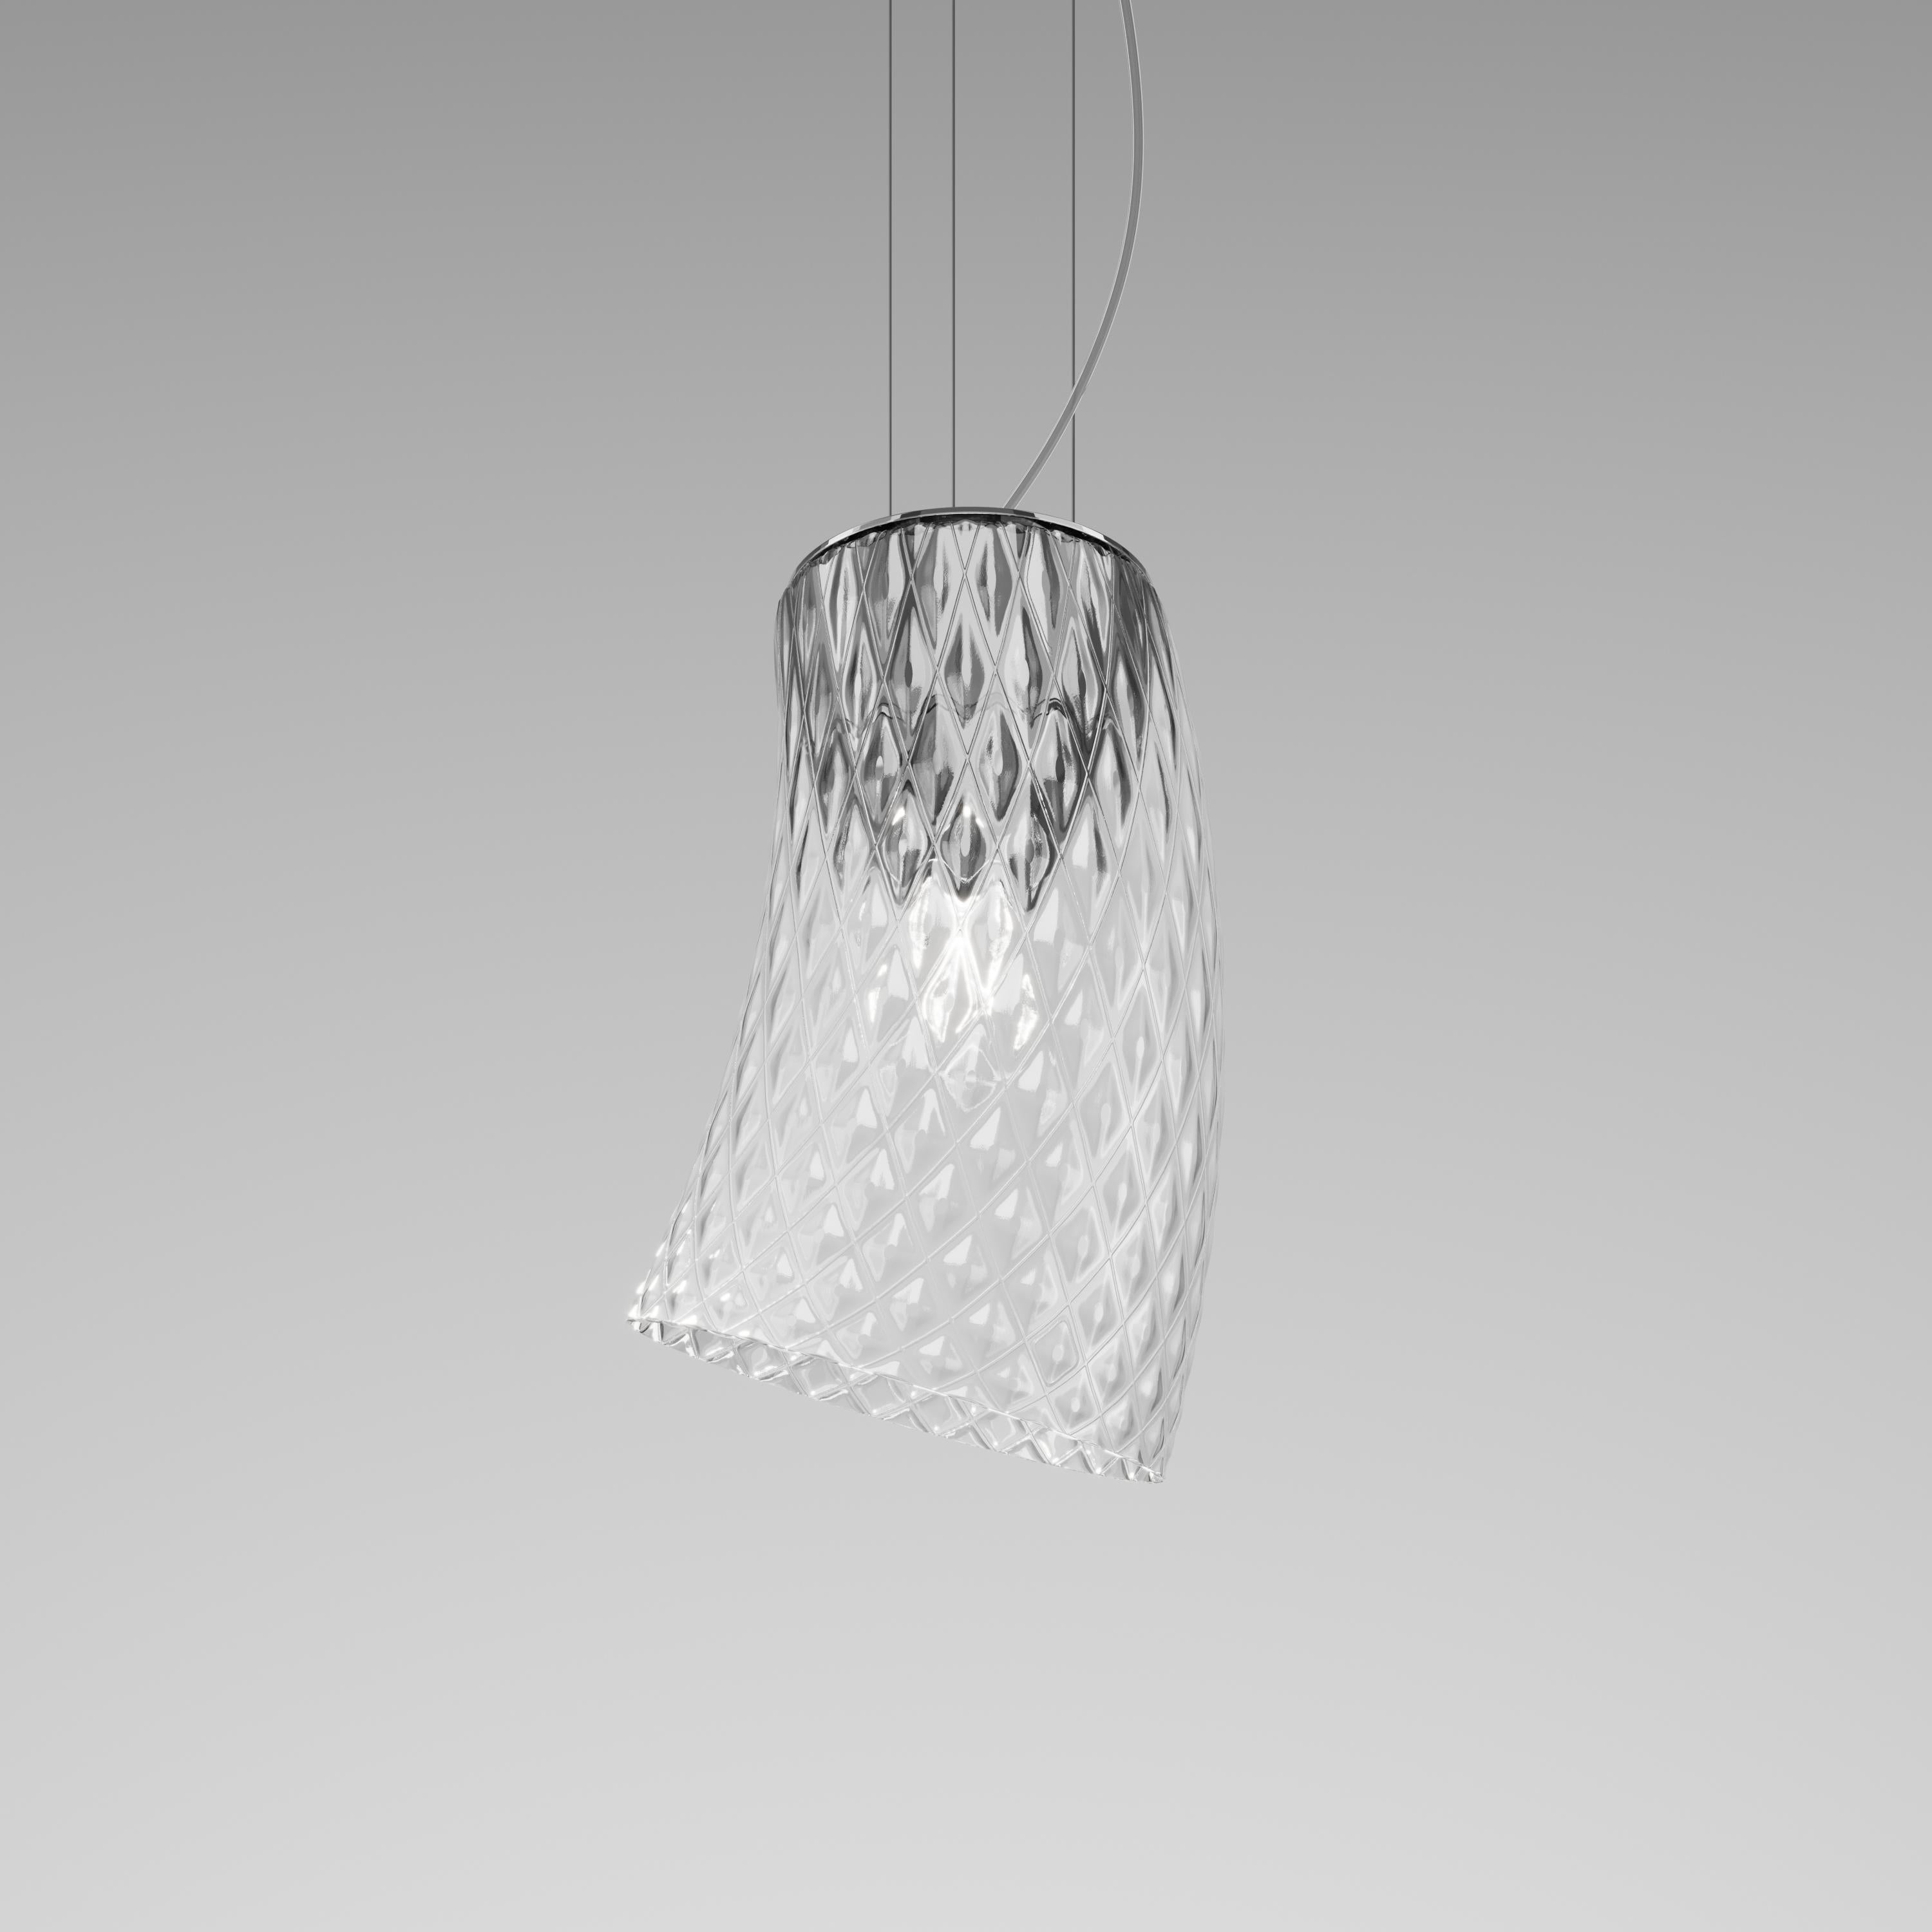 The collection is composed of two glass cylinders available in white or transparent “balloton” crystal. The two elements are rotating and can be oriented in different directions, thus allowing always different and unique